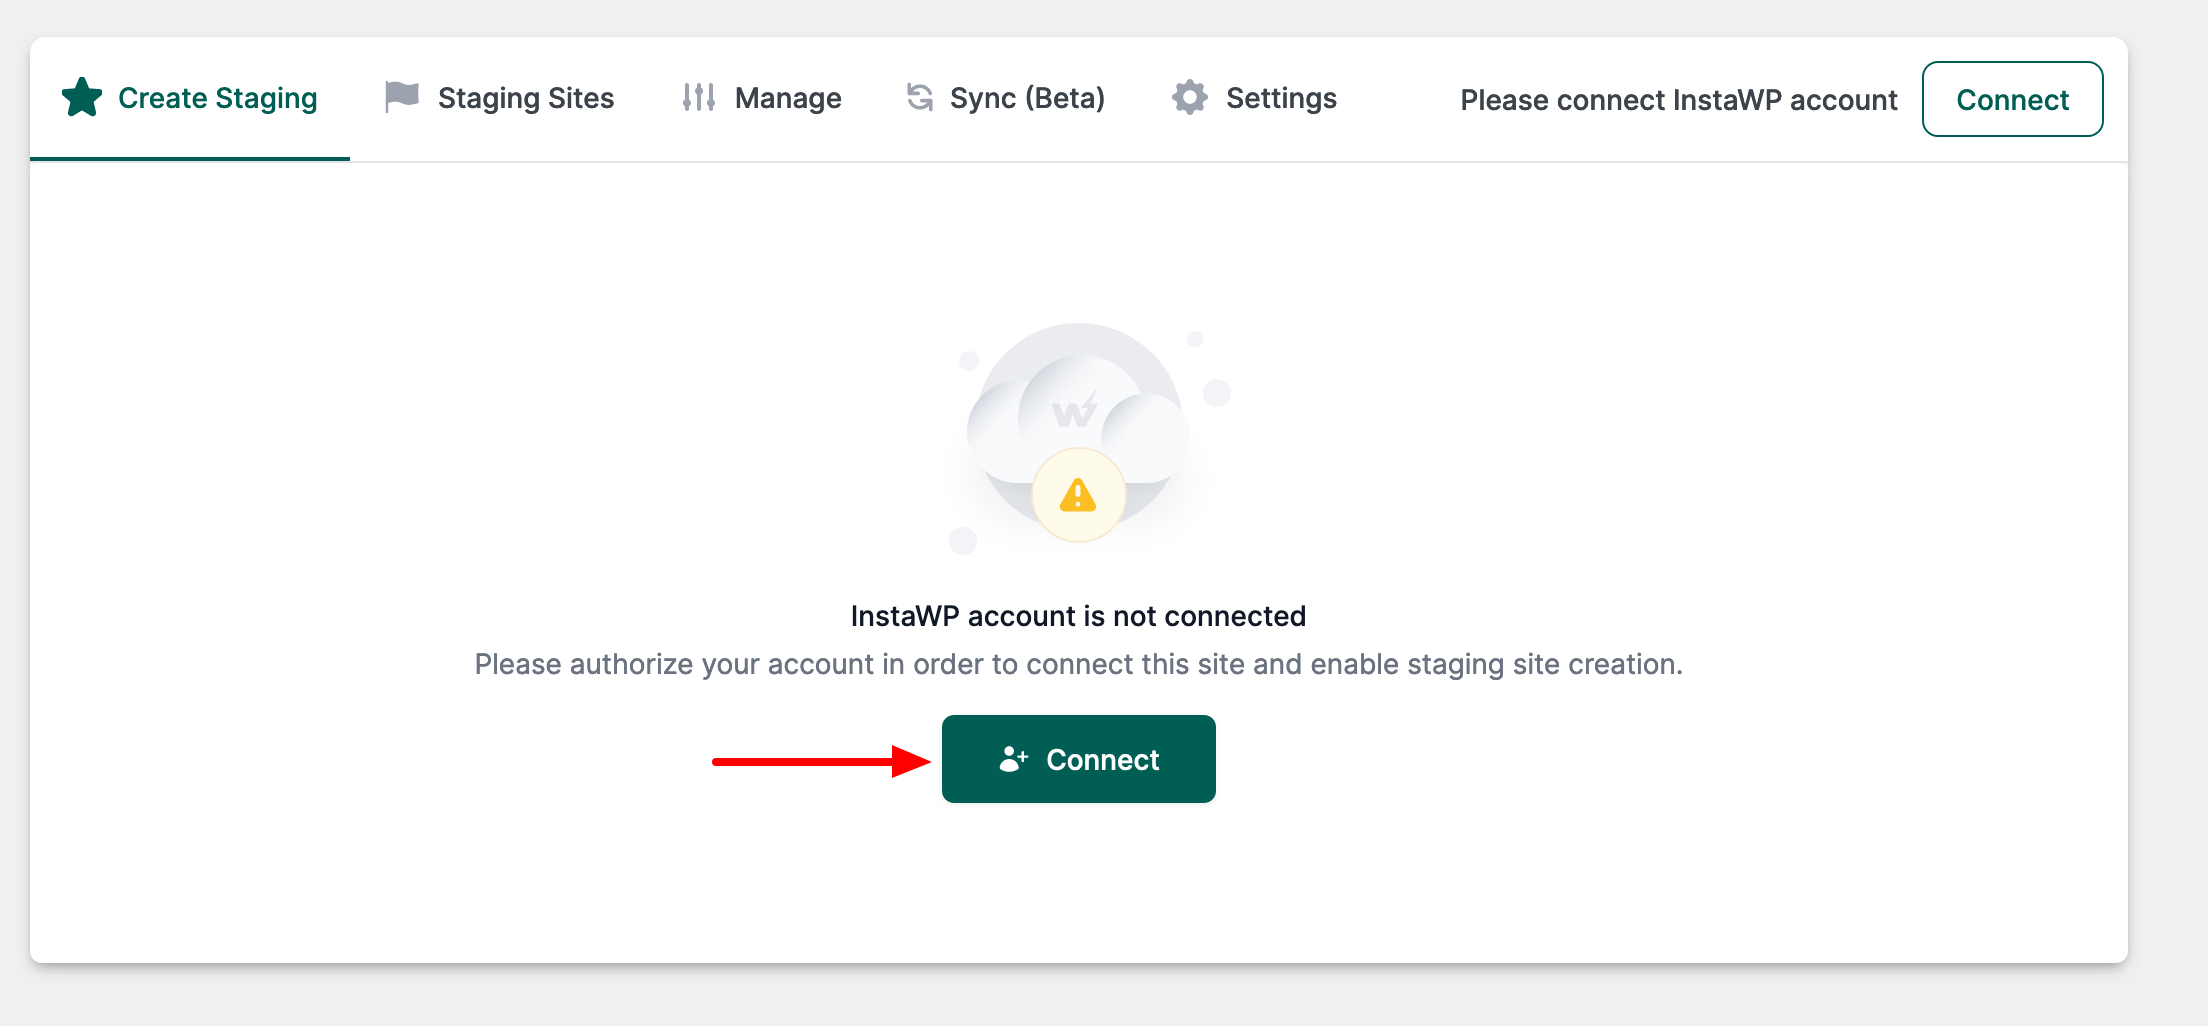 Connecting your InstaWP account to create a staging site.